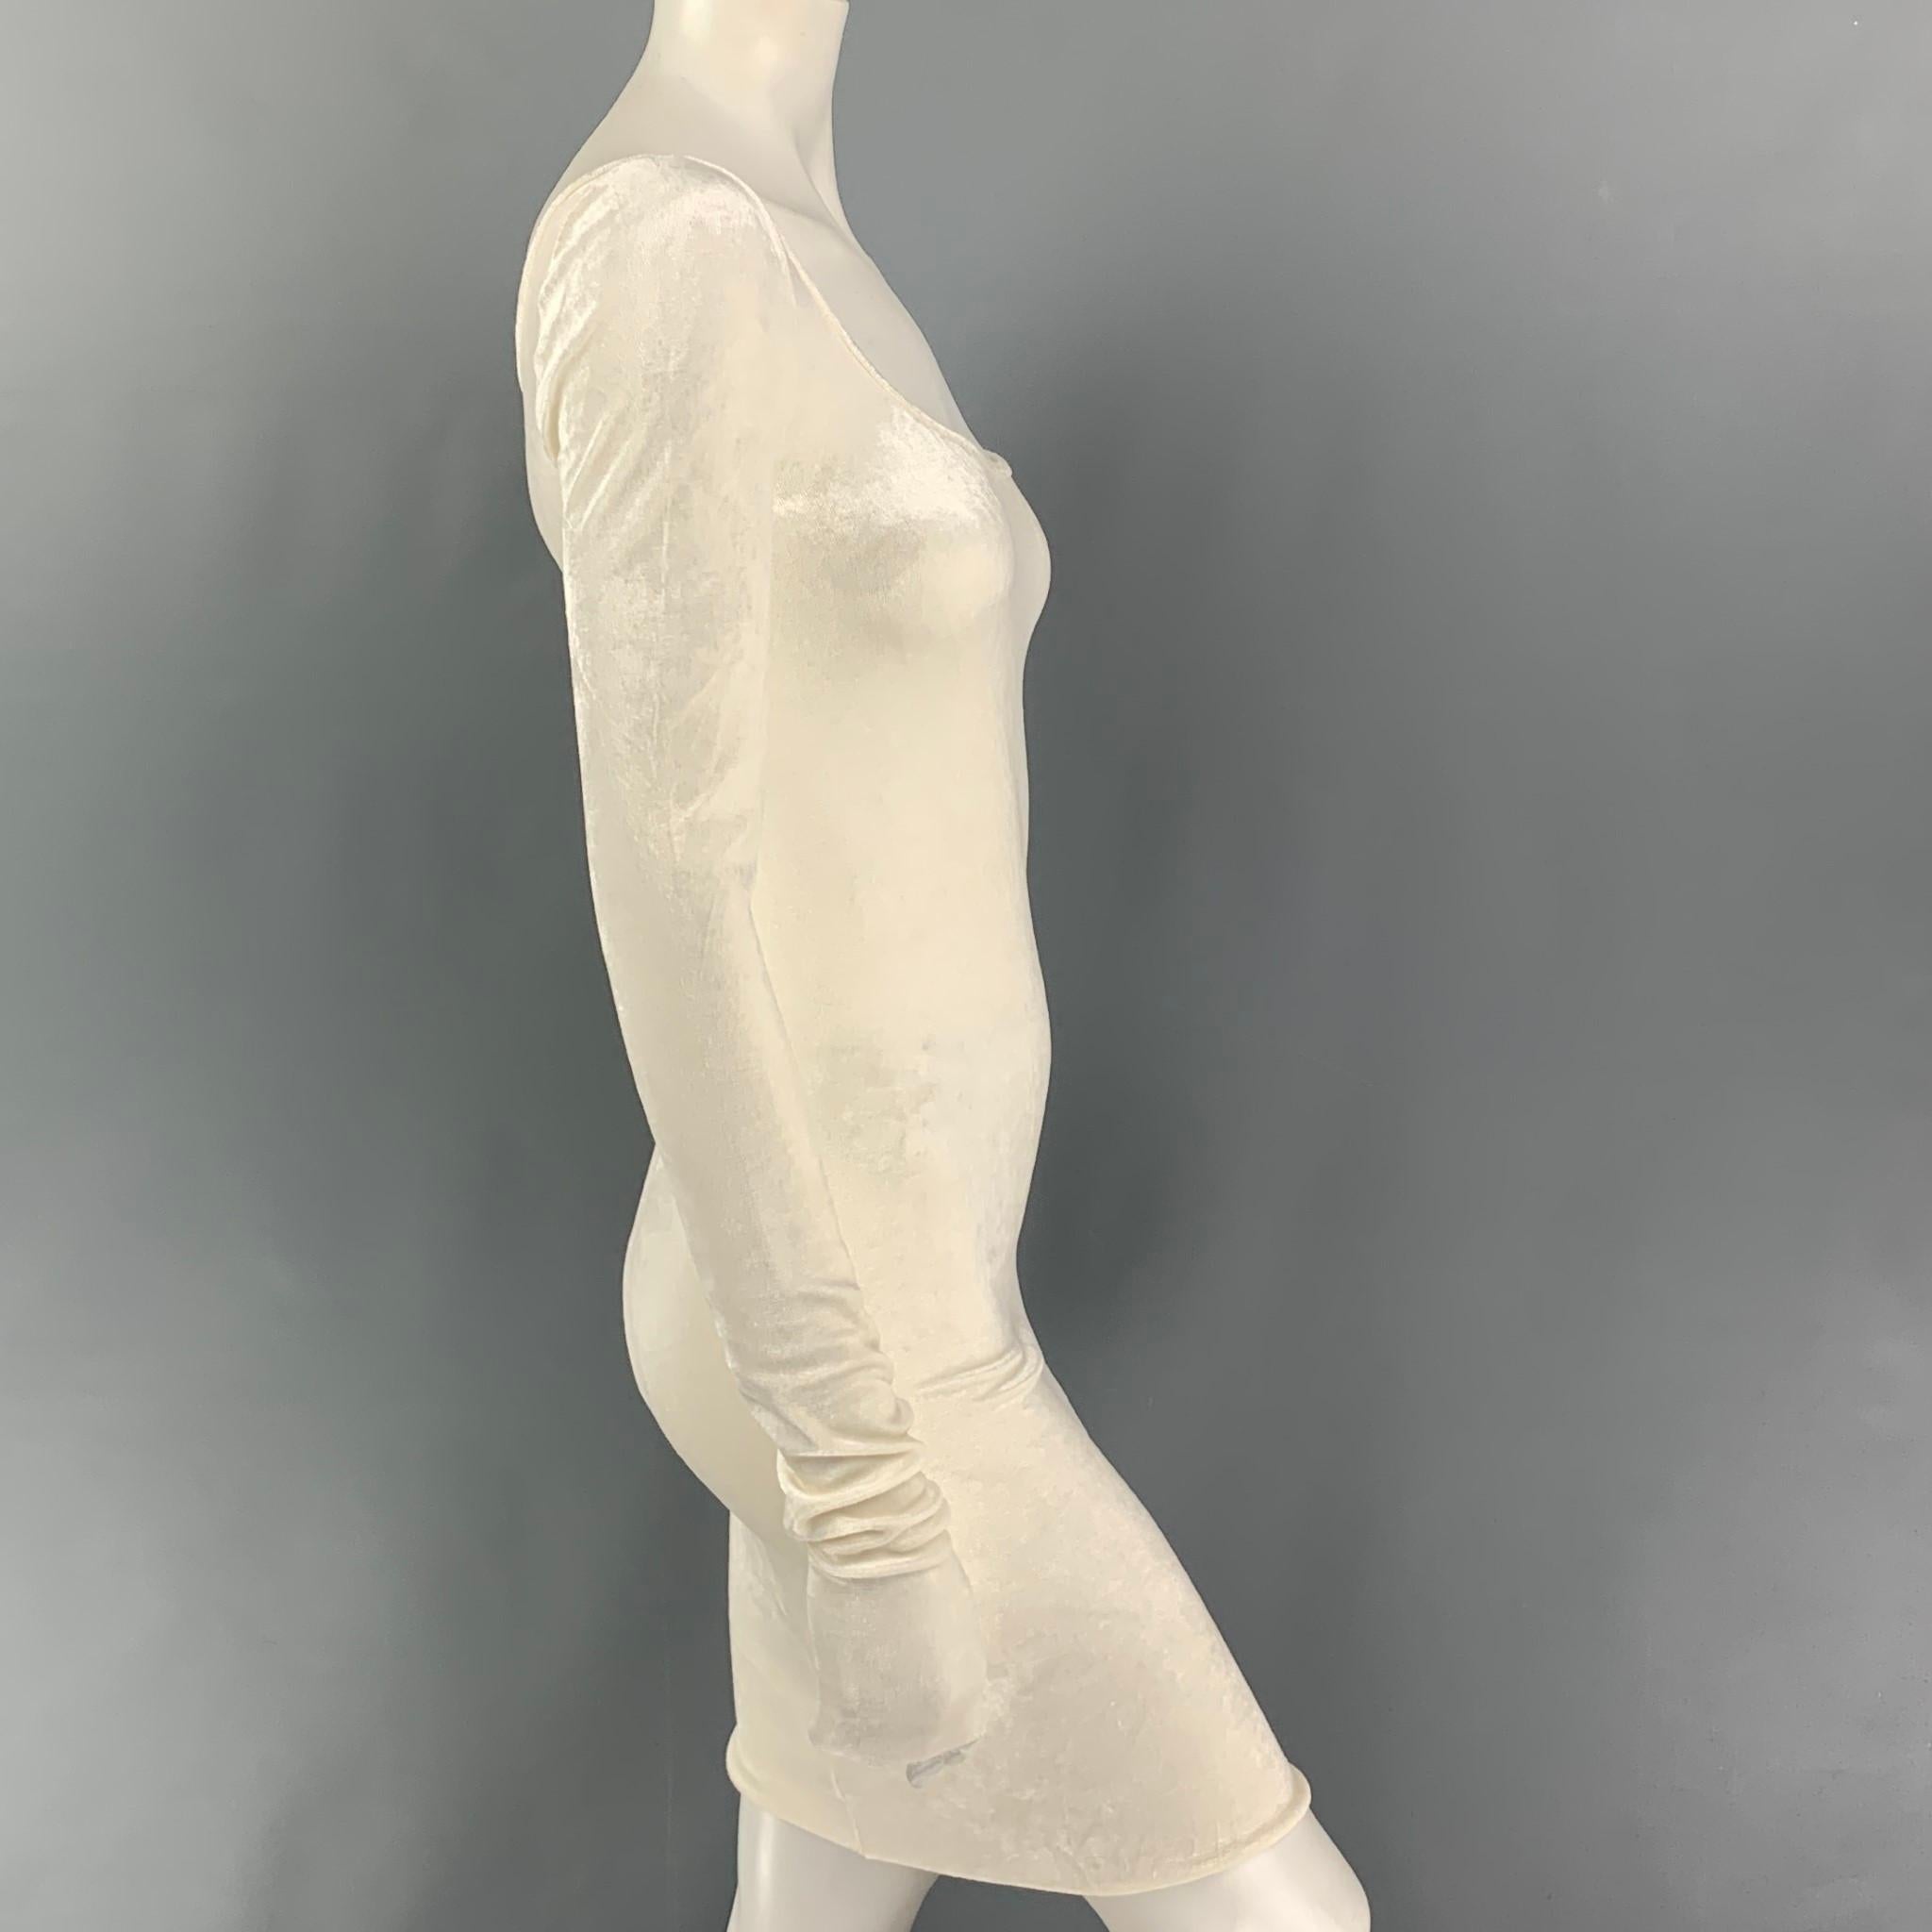 RICK OWENS 'LILIES' mini dress comes in a cream plush velour viscose / nylon featuring a scooped neckline and extra long sleeves. 

Very Good Pre-Owned Condition.
Marked: IT 40 / GB 8 / DE 36 / US 2
Original Retail Price: